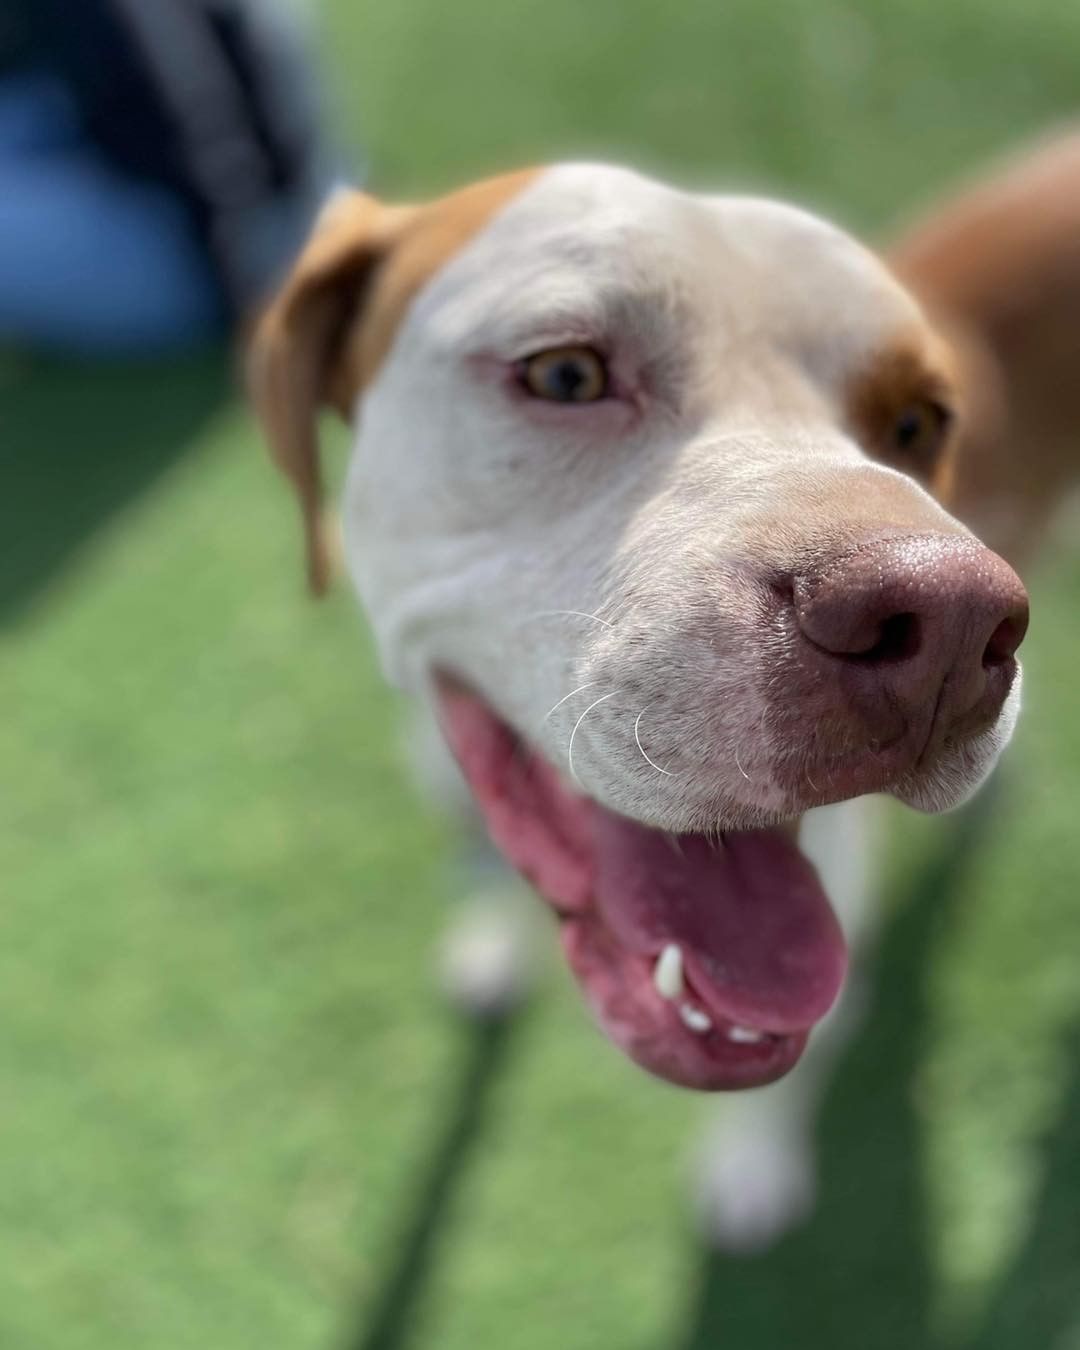 Rylan wanted to show off all his angles, and it seems he doesn’t have a bad one! 

This handsome boy has been searching for a special home to call his own for 7 months 😢💔

Rylan is a 2 year old pit mix who needs a home with a patient adopter that will help him become more confident and allow him to come out of his shell at his own pace. Rylan gains confidence by being around other dogs who dog better than he does. 

His ideal home doesn’t have a lot of people coming and going. He would do well in a home with older kids. He just needs a special someone to give him all the love forever has to offer!

Apply to adopt Rylan at lucky13rescue.org or by using the link: https://www.shelterluv.com/matchme/adopt/LUCK/Dog